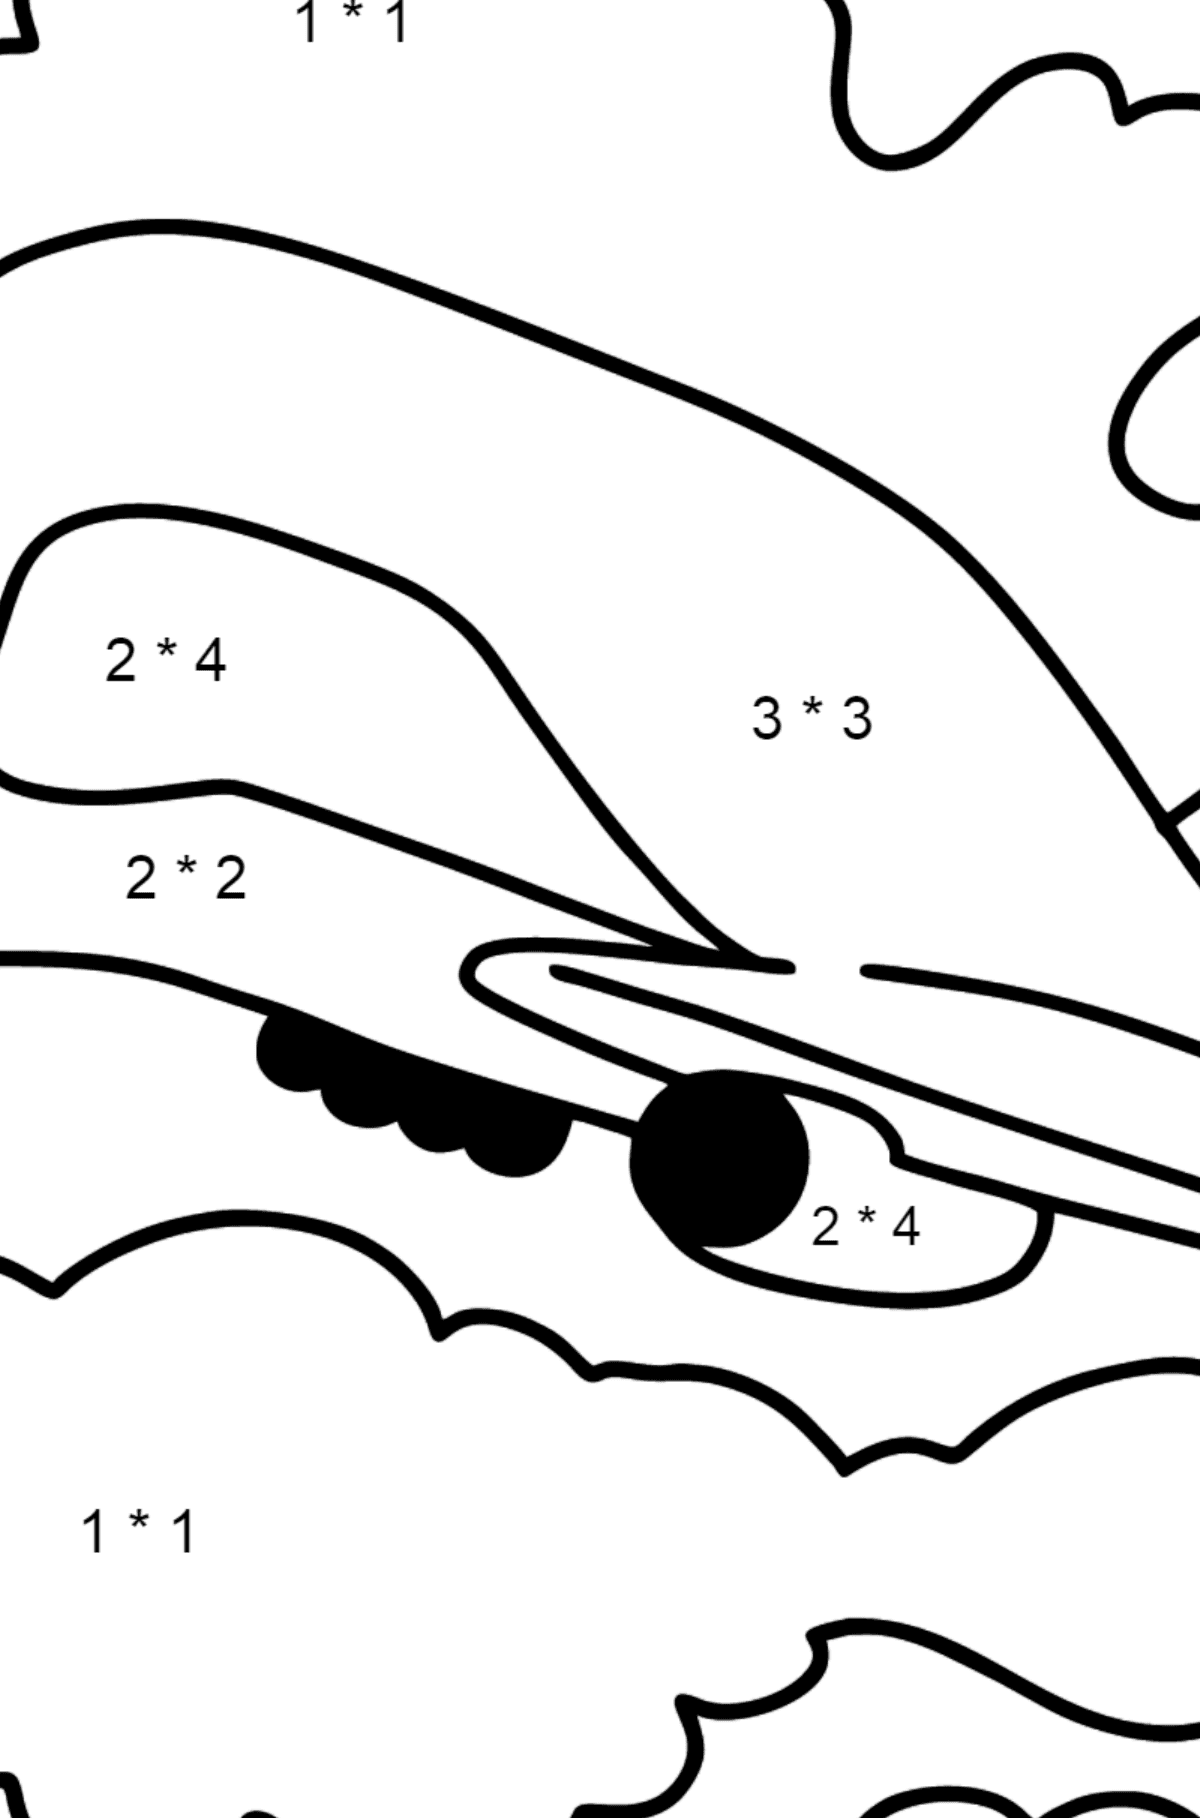 Cargo Plane coloring page - Math Coloring - Multiplication for Kids